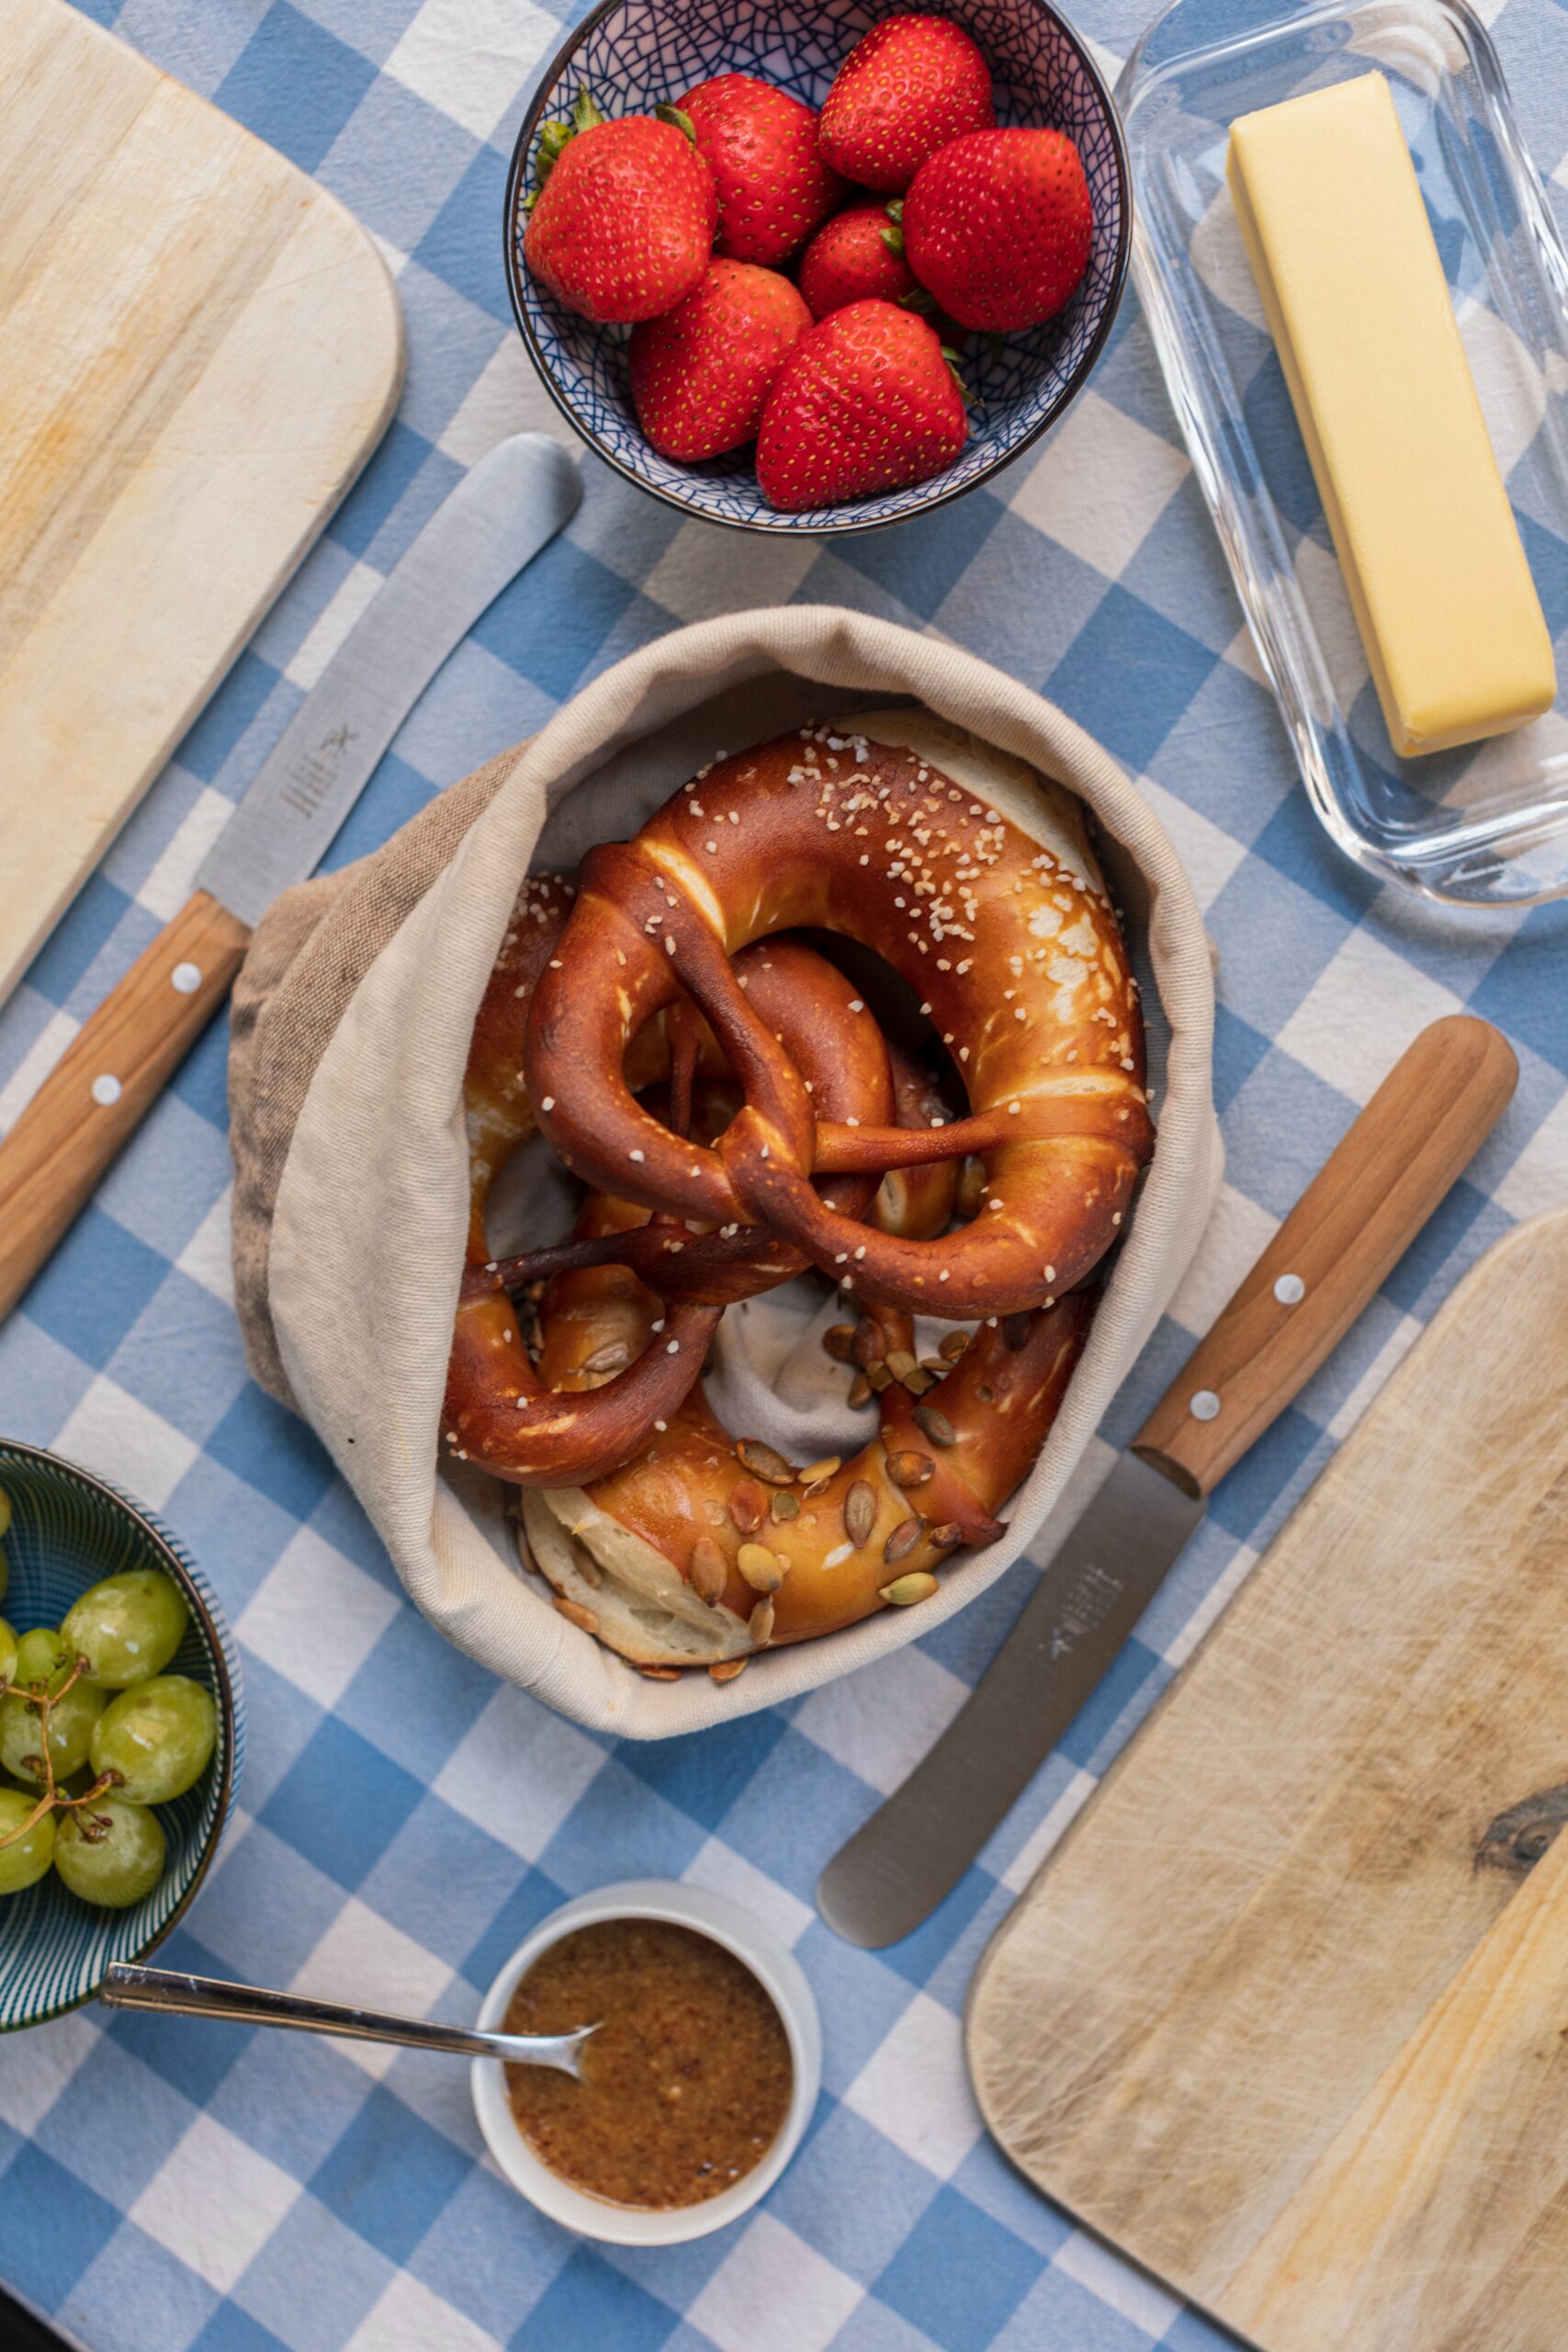 One of the best things to do in Germany: eat Pretzels for breakfast